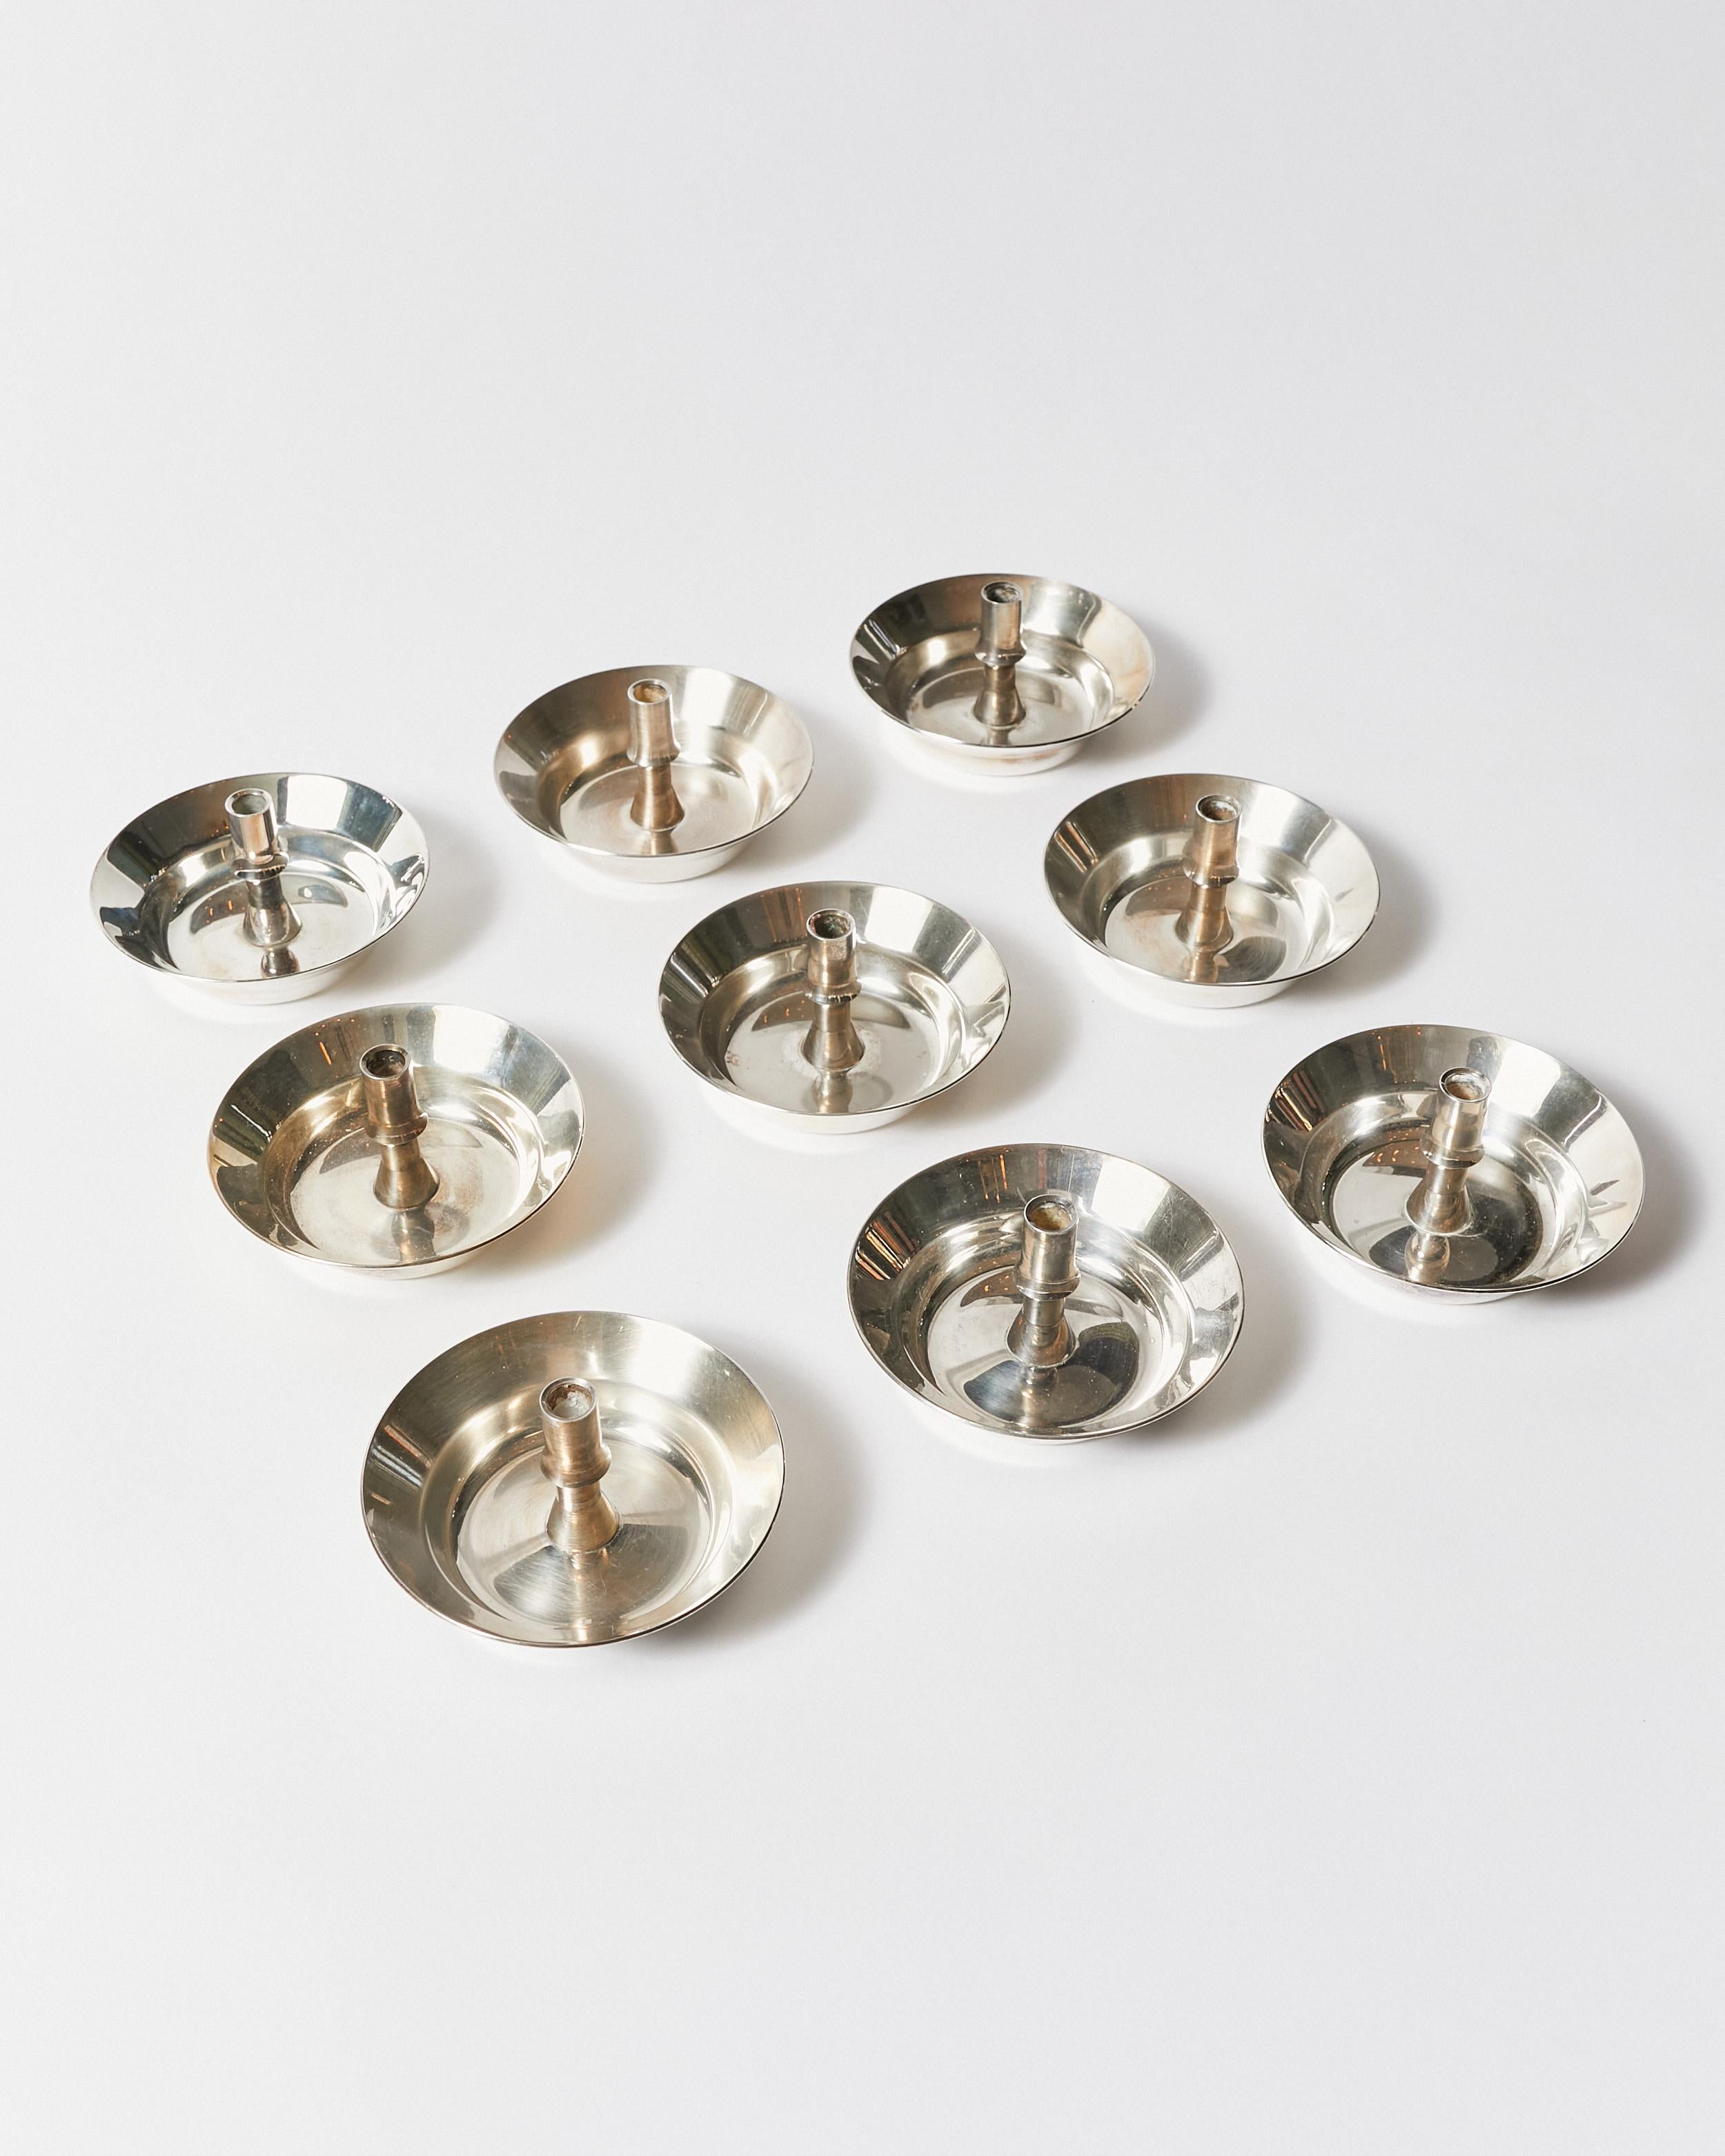 Set of nine silver-plated 'saucer' candle holders. The set can work in both, causal and formal settings. Designed by Jens Quistgaard and produced by Dansk Designs Copenhagen.